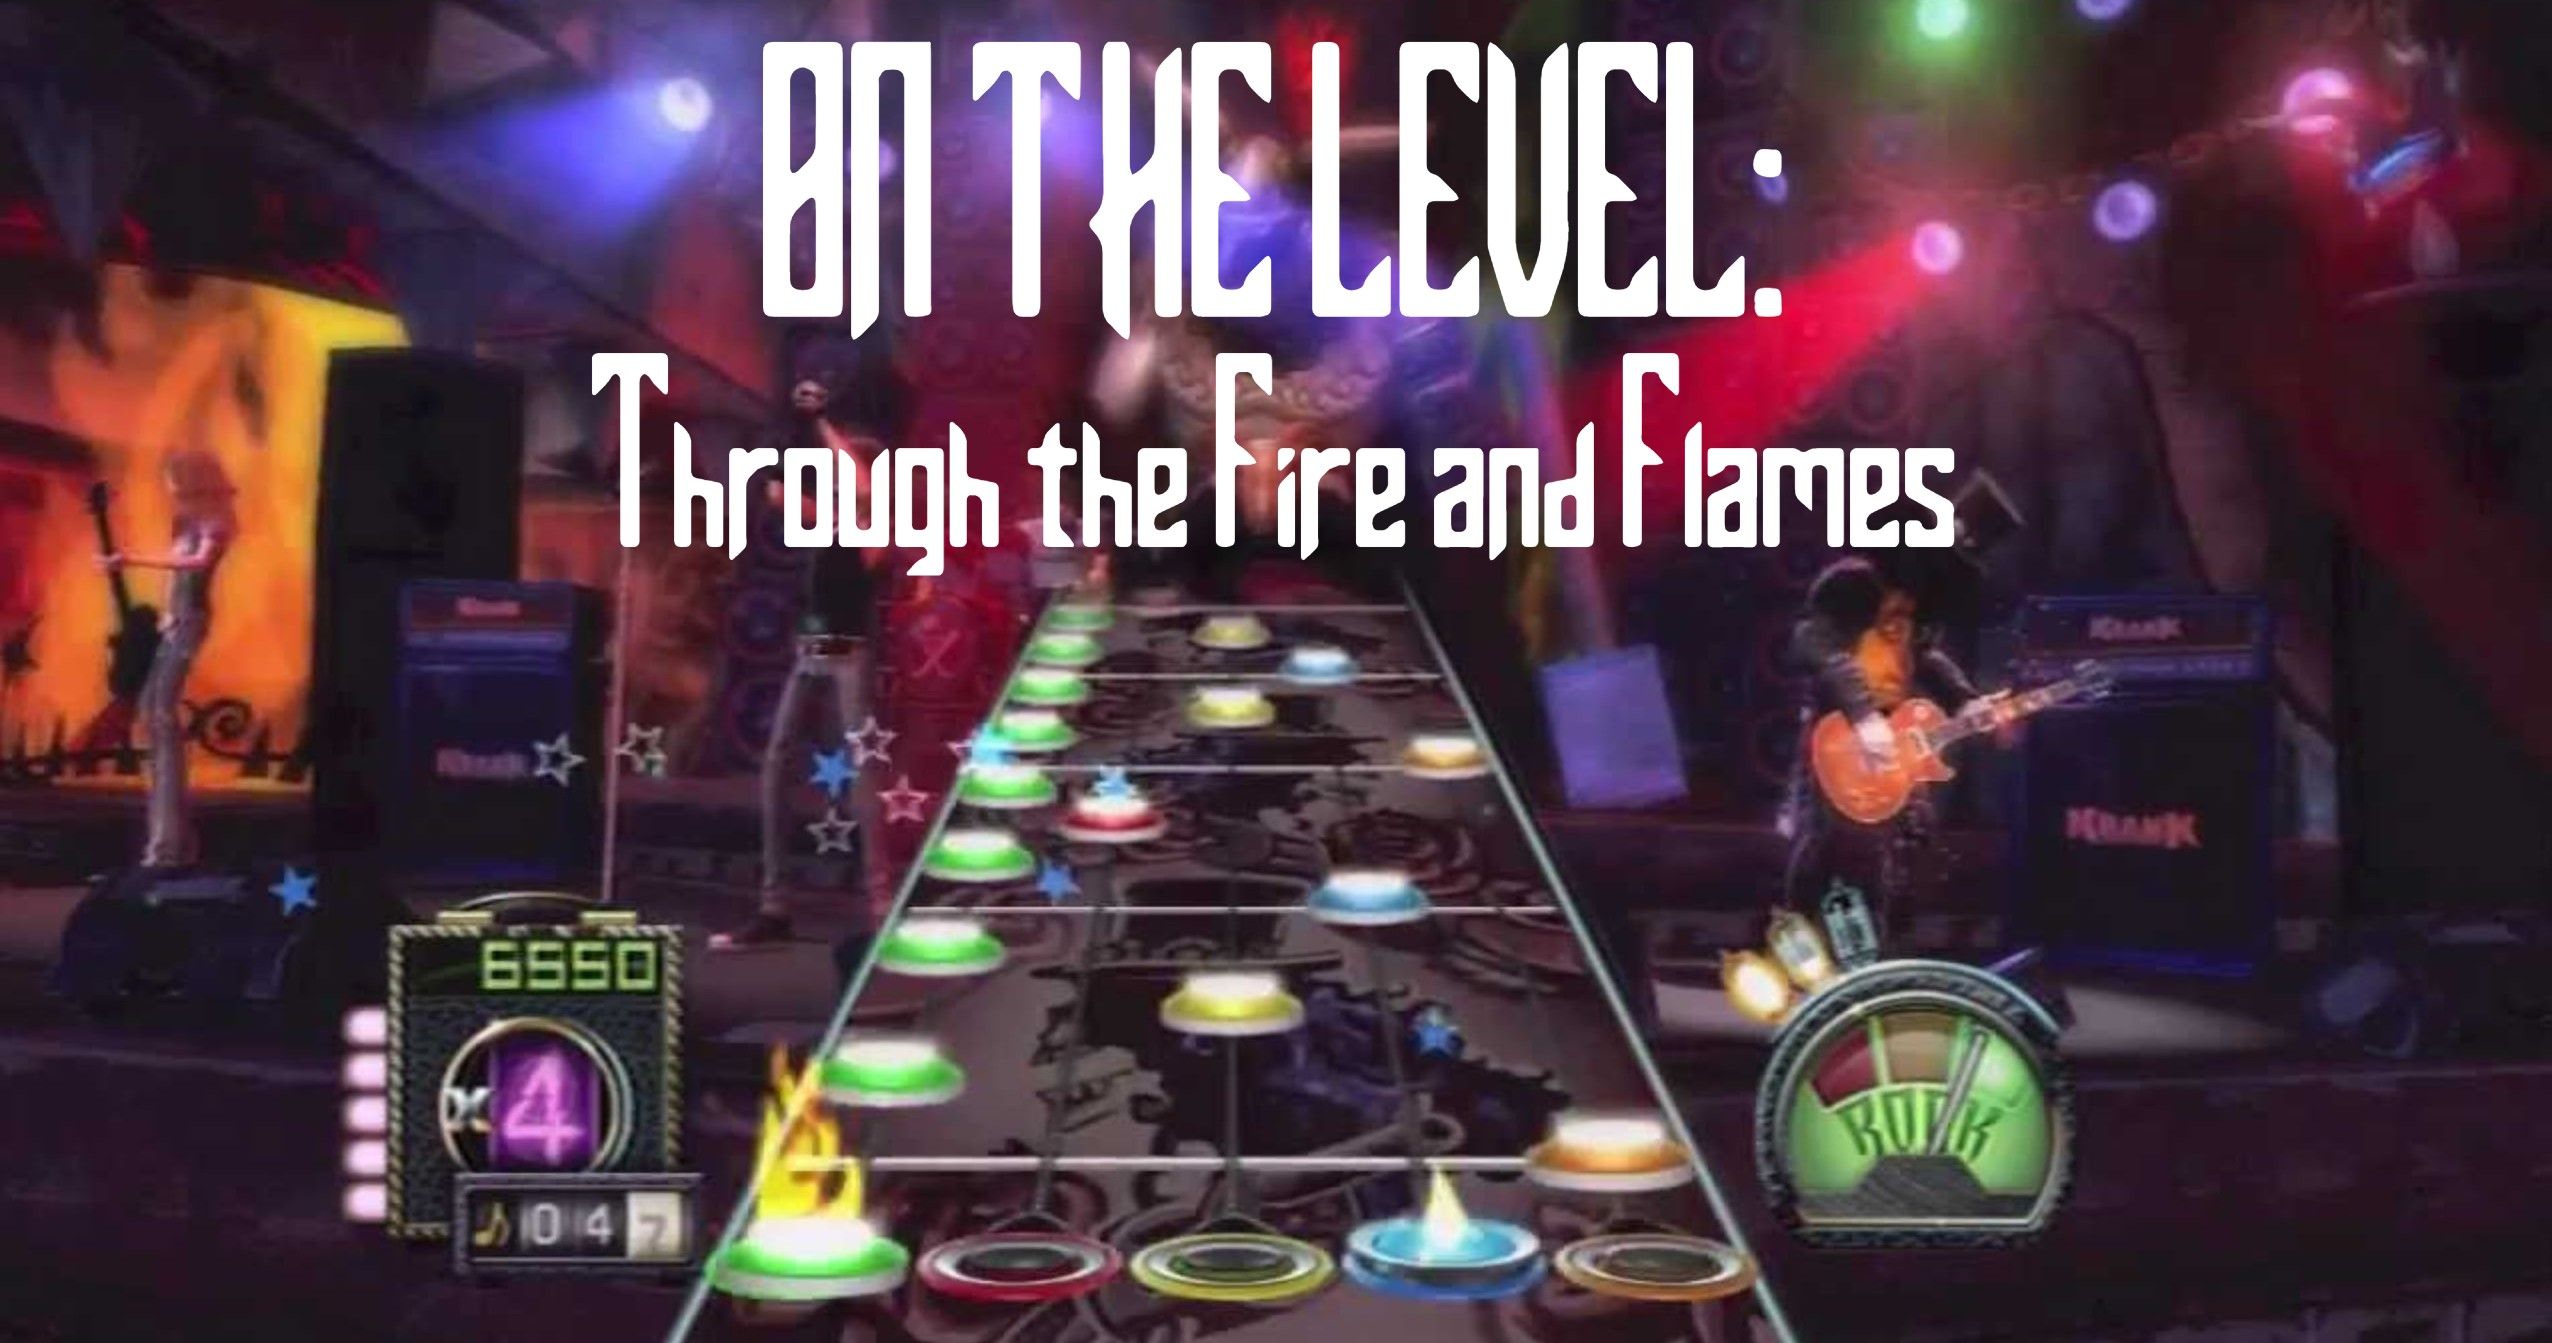 Stream Guitar Hero 3 - 41 - DragonForce - Through The Fire And Flames by  AngelPlaysMC